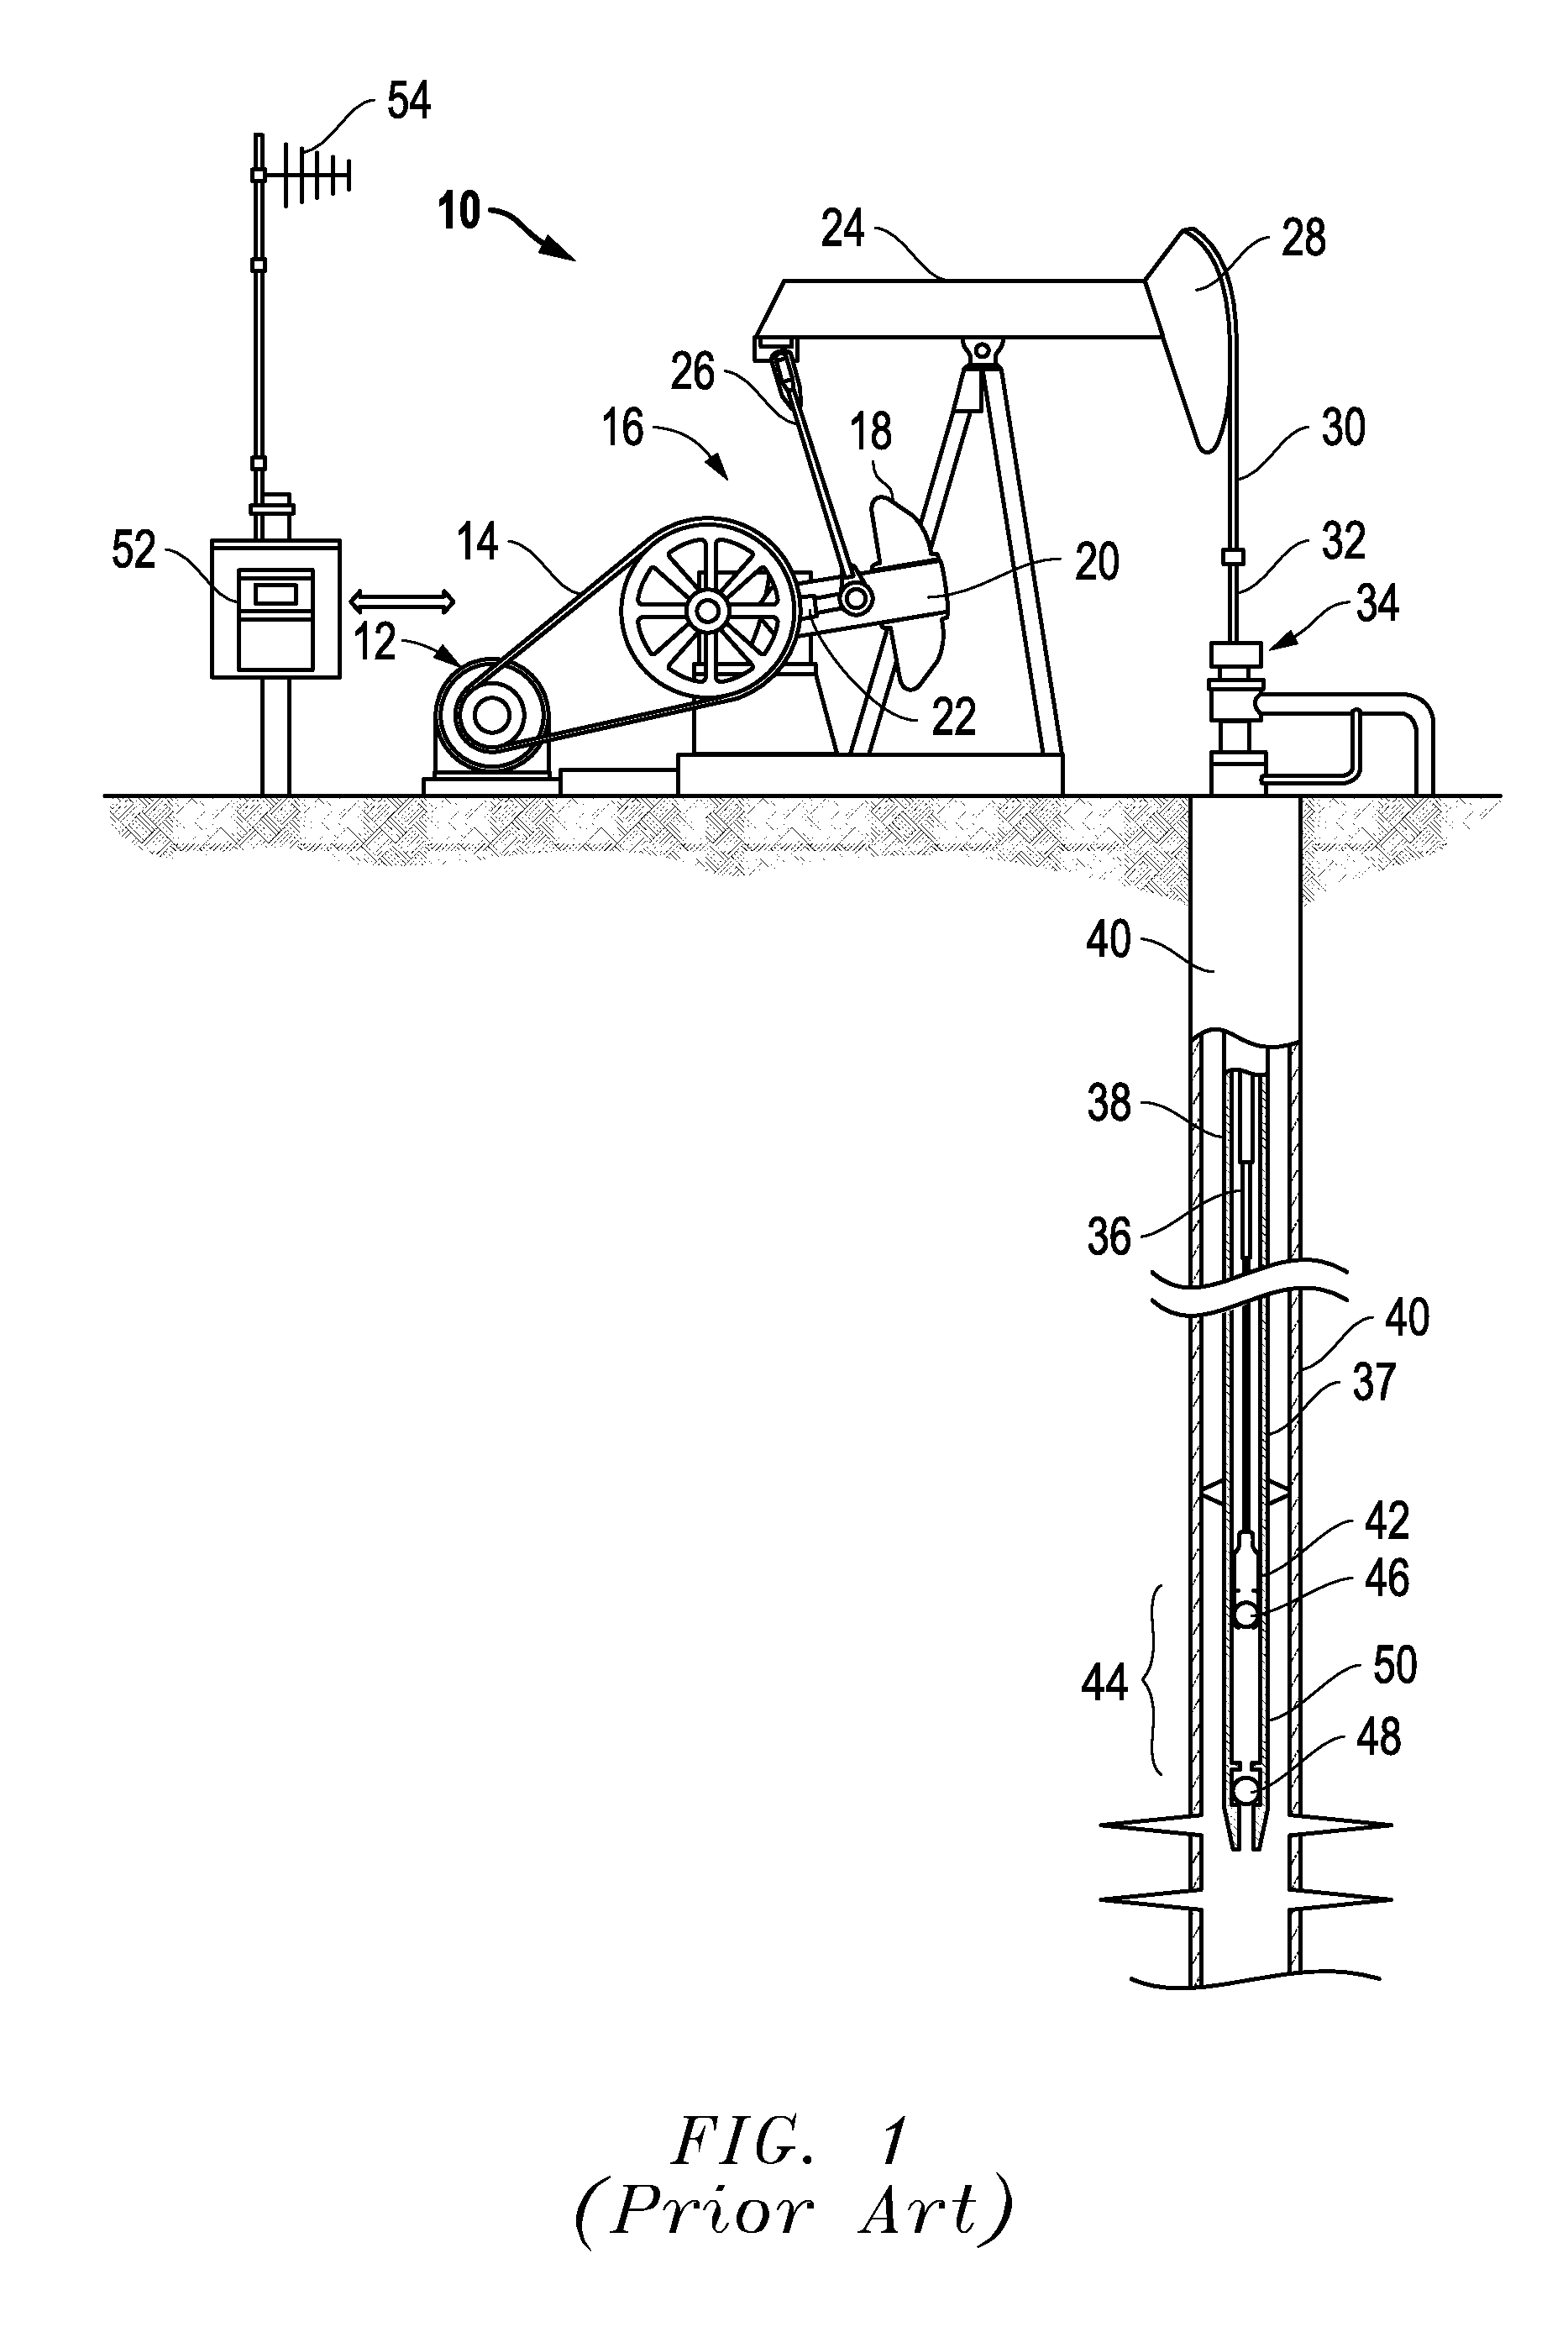 System and Method for Measuring Well Flow Rate